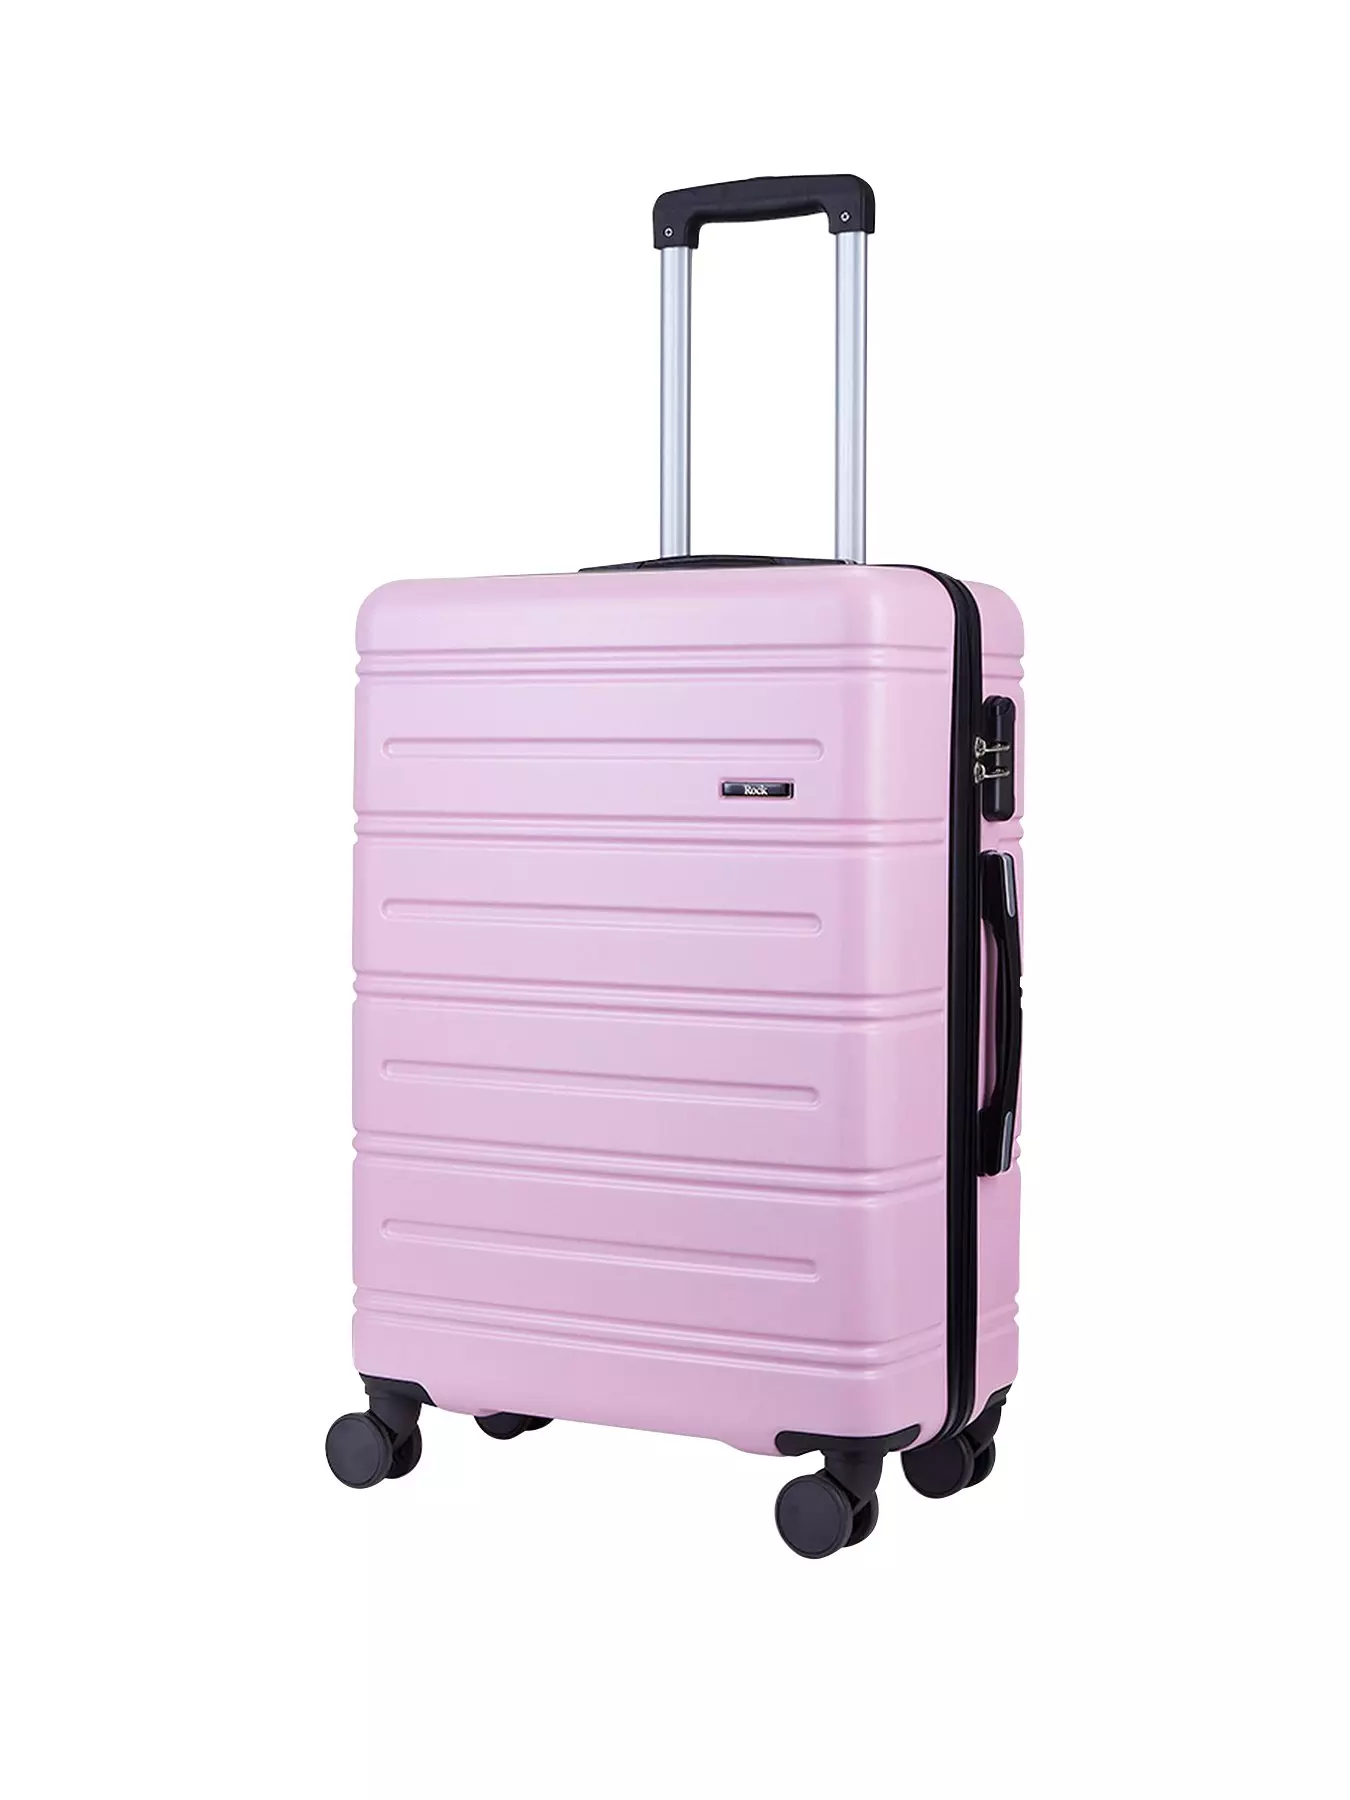 Source Pink women boarding box 360 degree trolley travel suitcase sets abs  luggage bag on m.